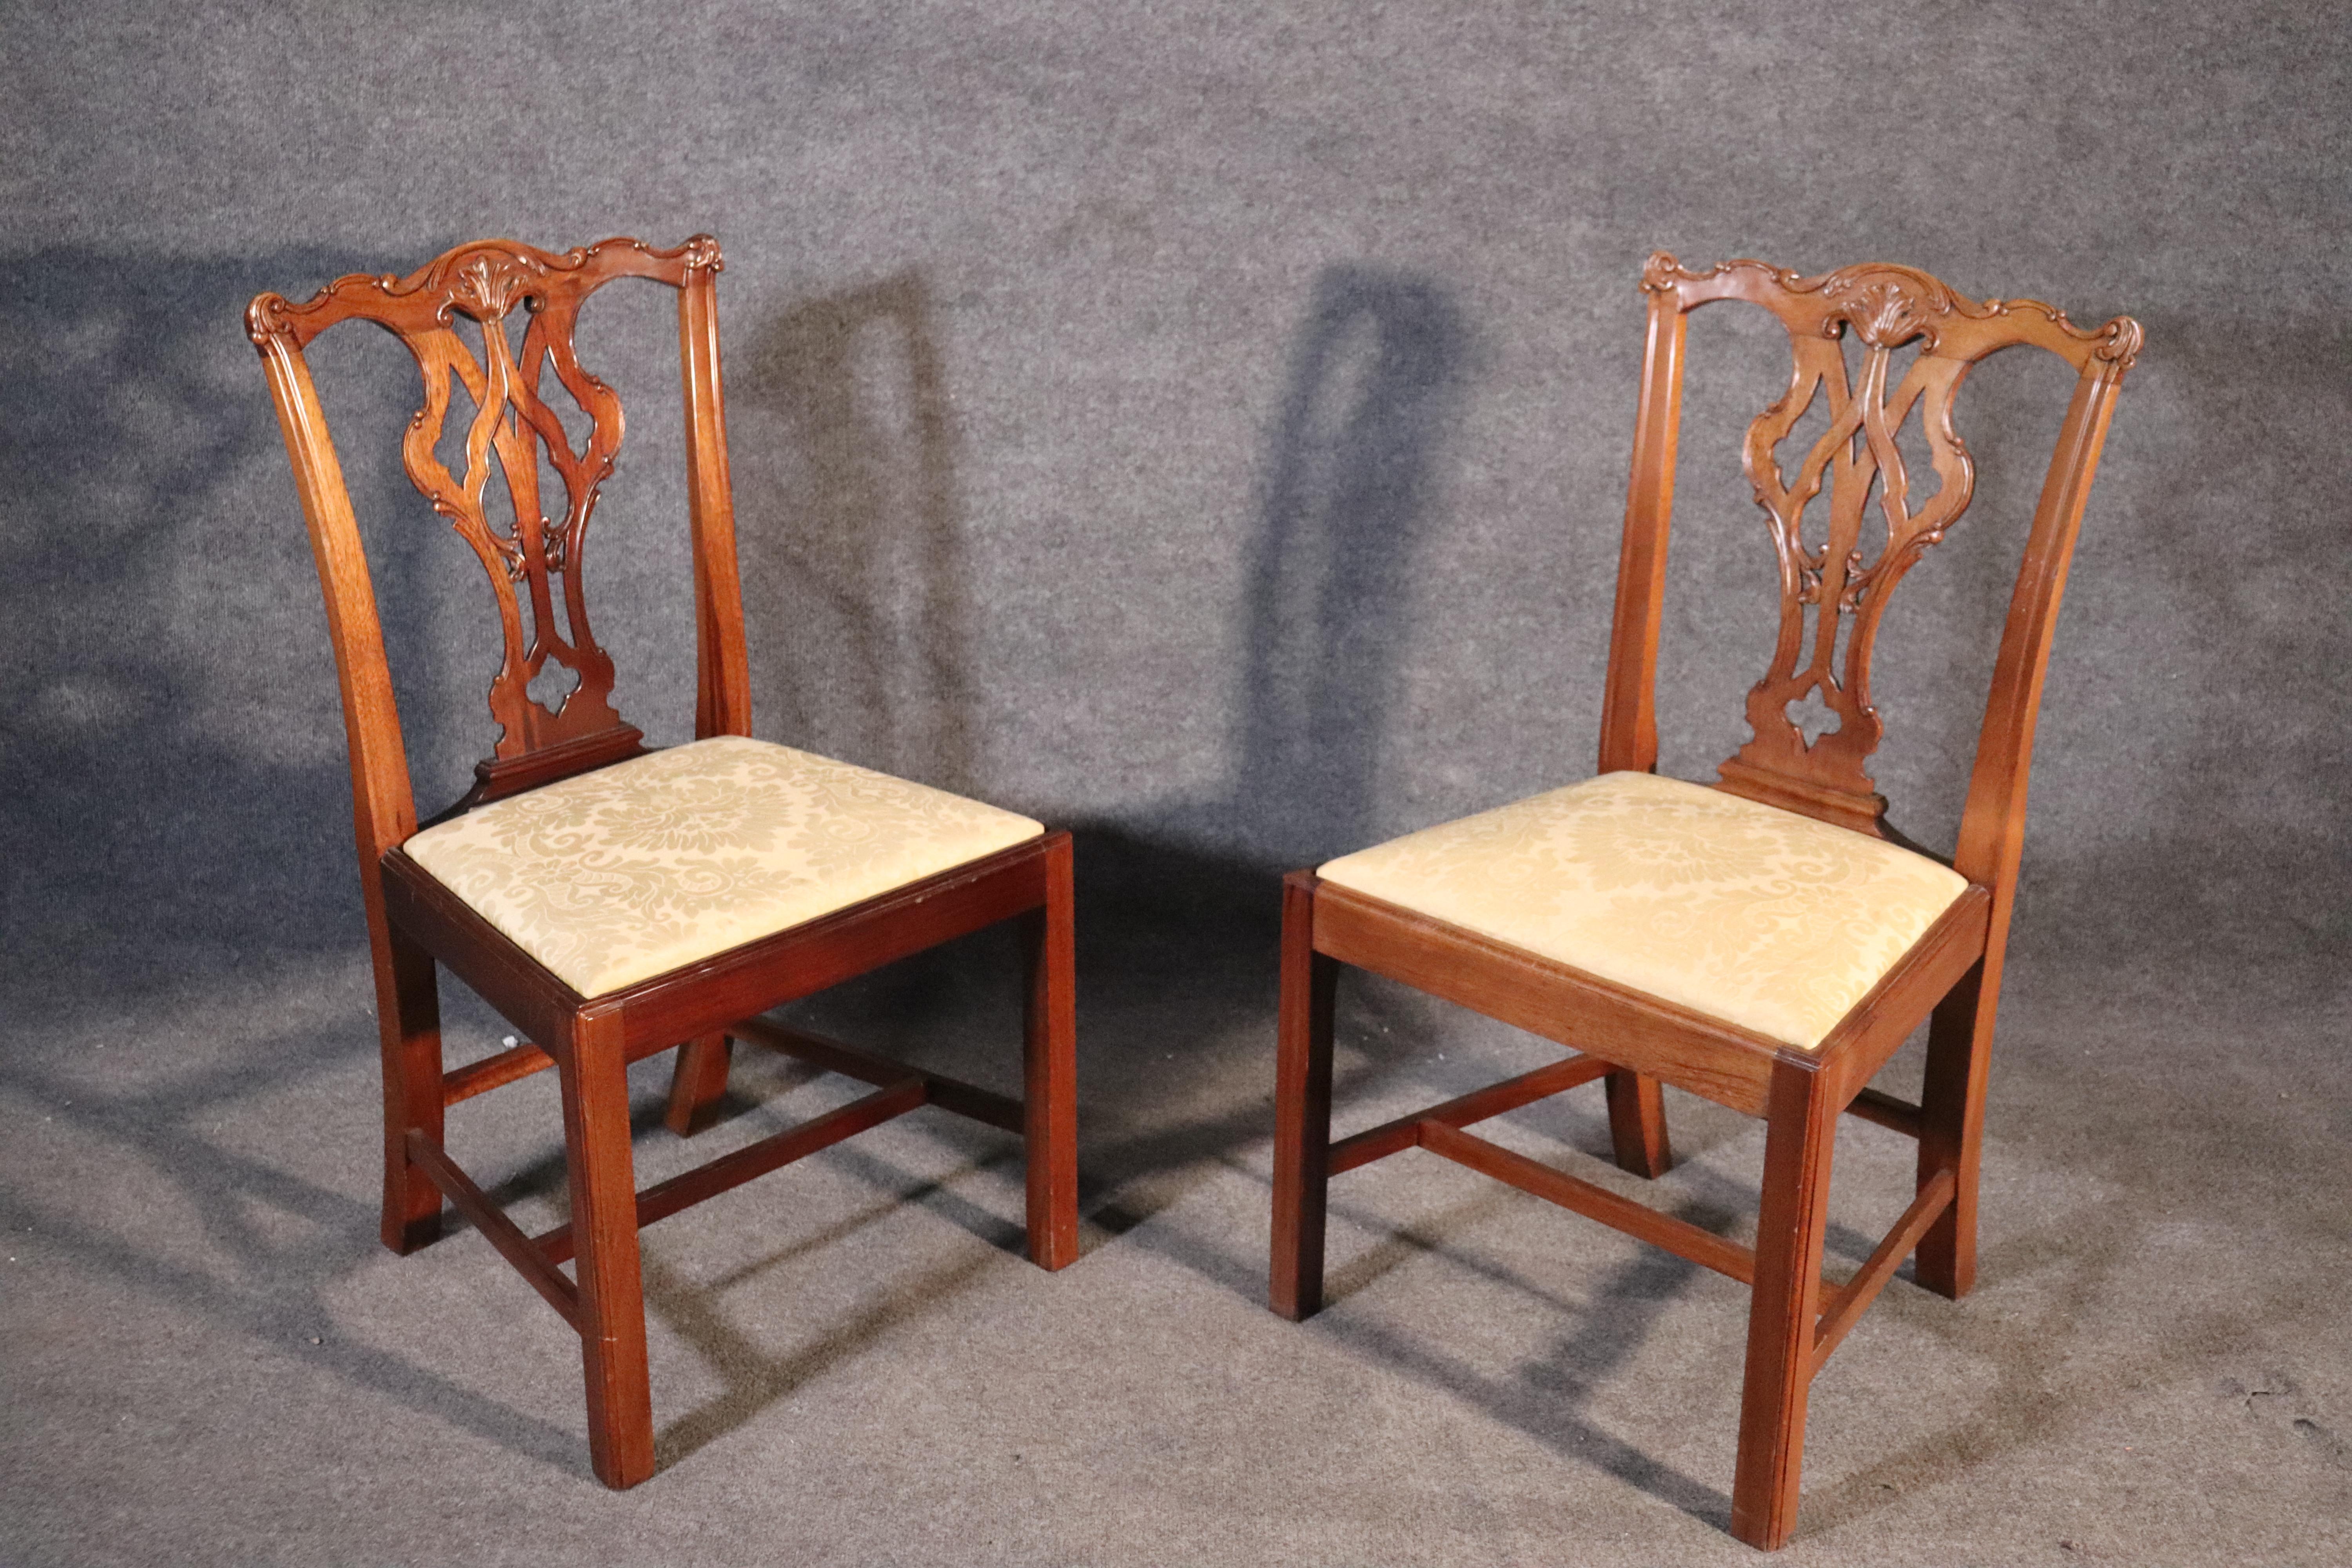 This is a gorgeous set of 1980s era custom made hand carved dining chairs. The chairs are heavy for their size and in good condition. The chairs do exhibit some tonal variations in wood within each of some of the chairs. This is often due to windows